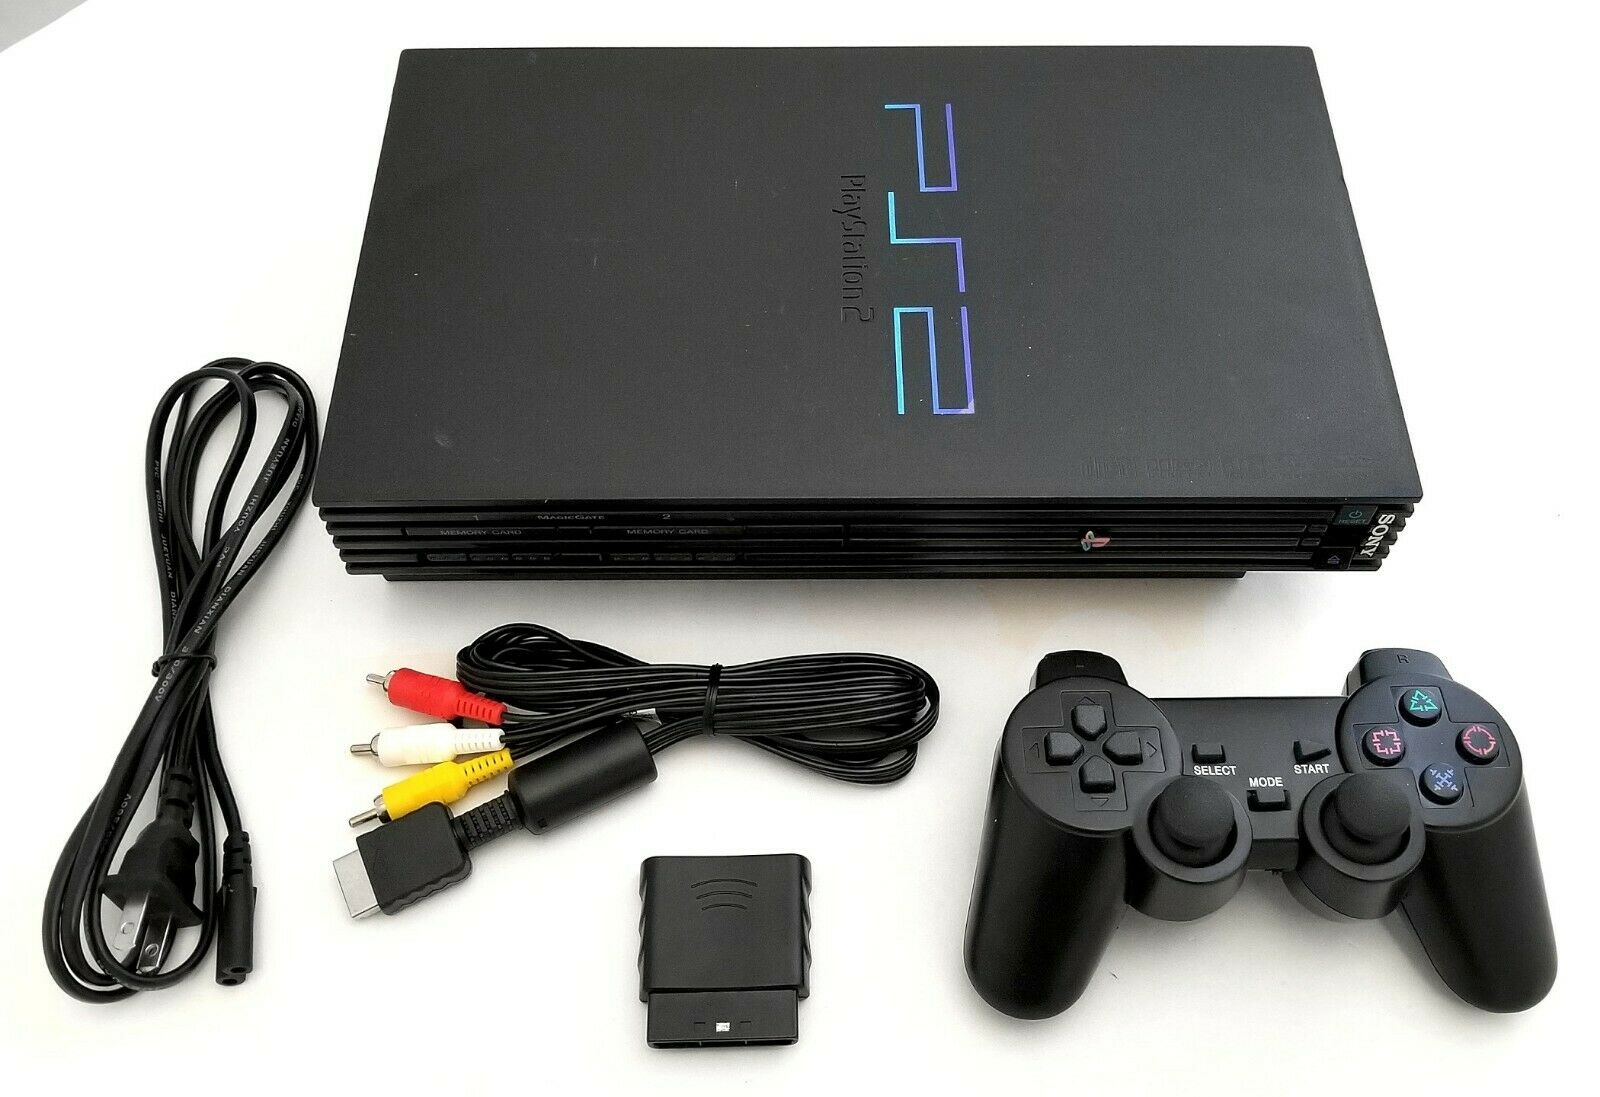 Original Sony Ps2 Gaming System Bundle Black Video Game Console Playstation-2